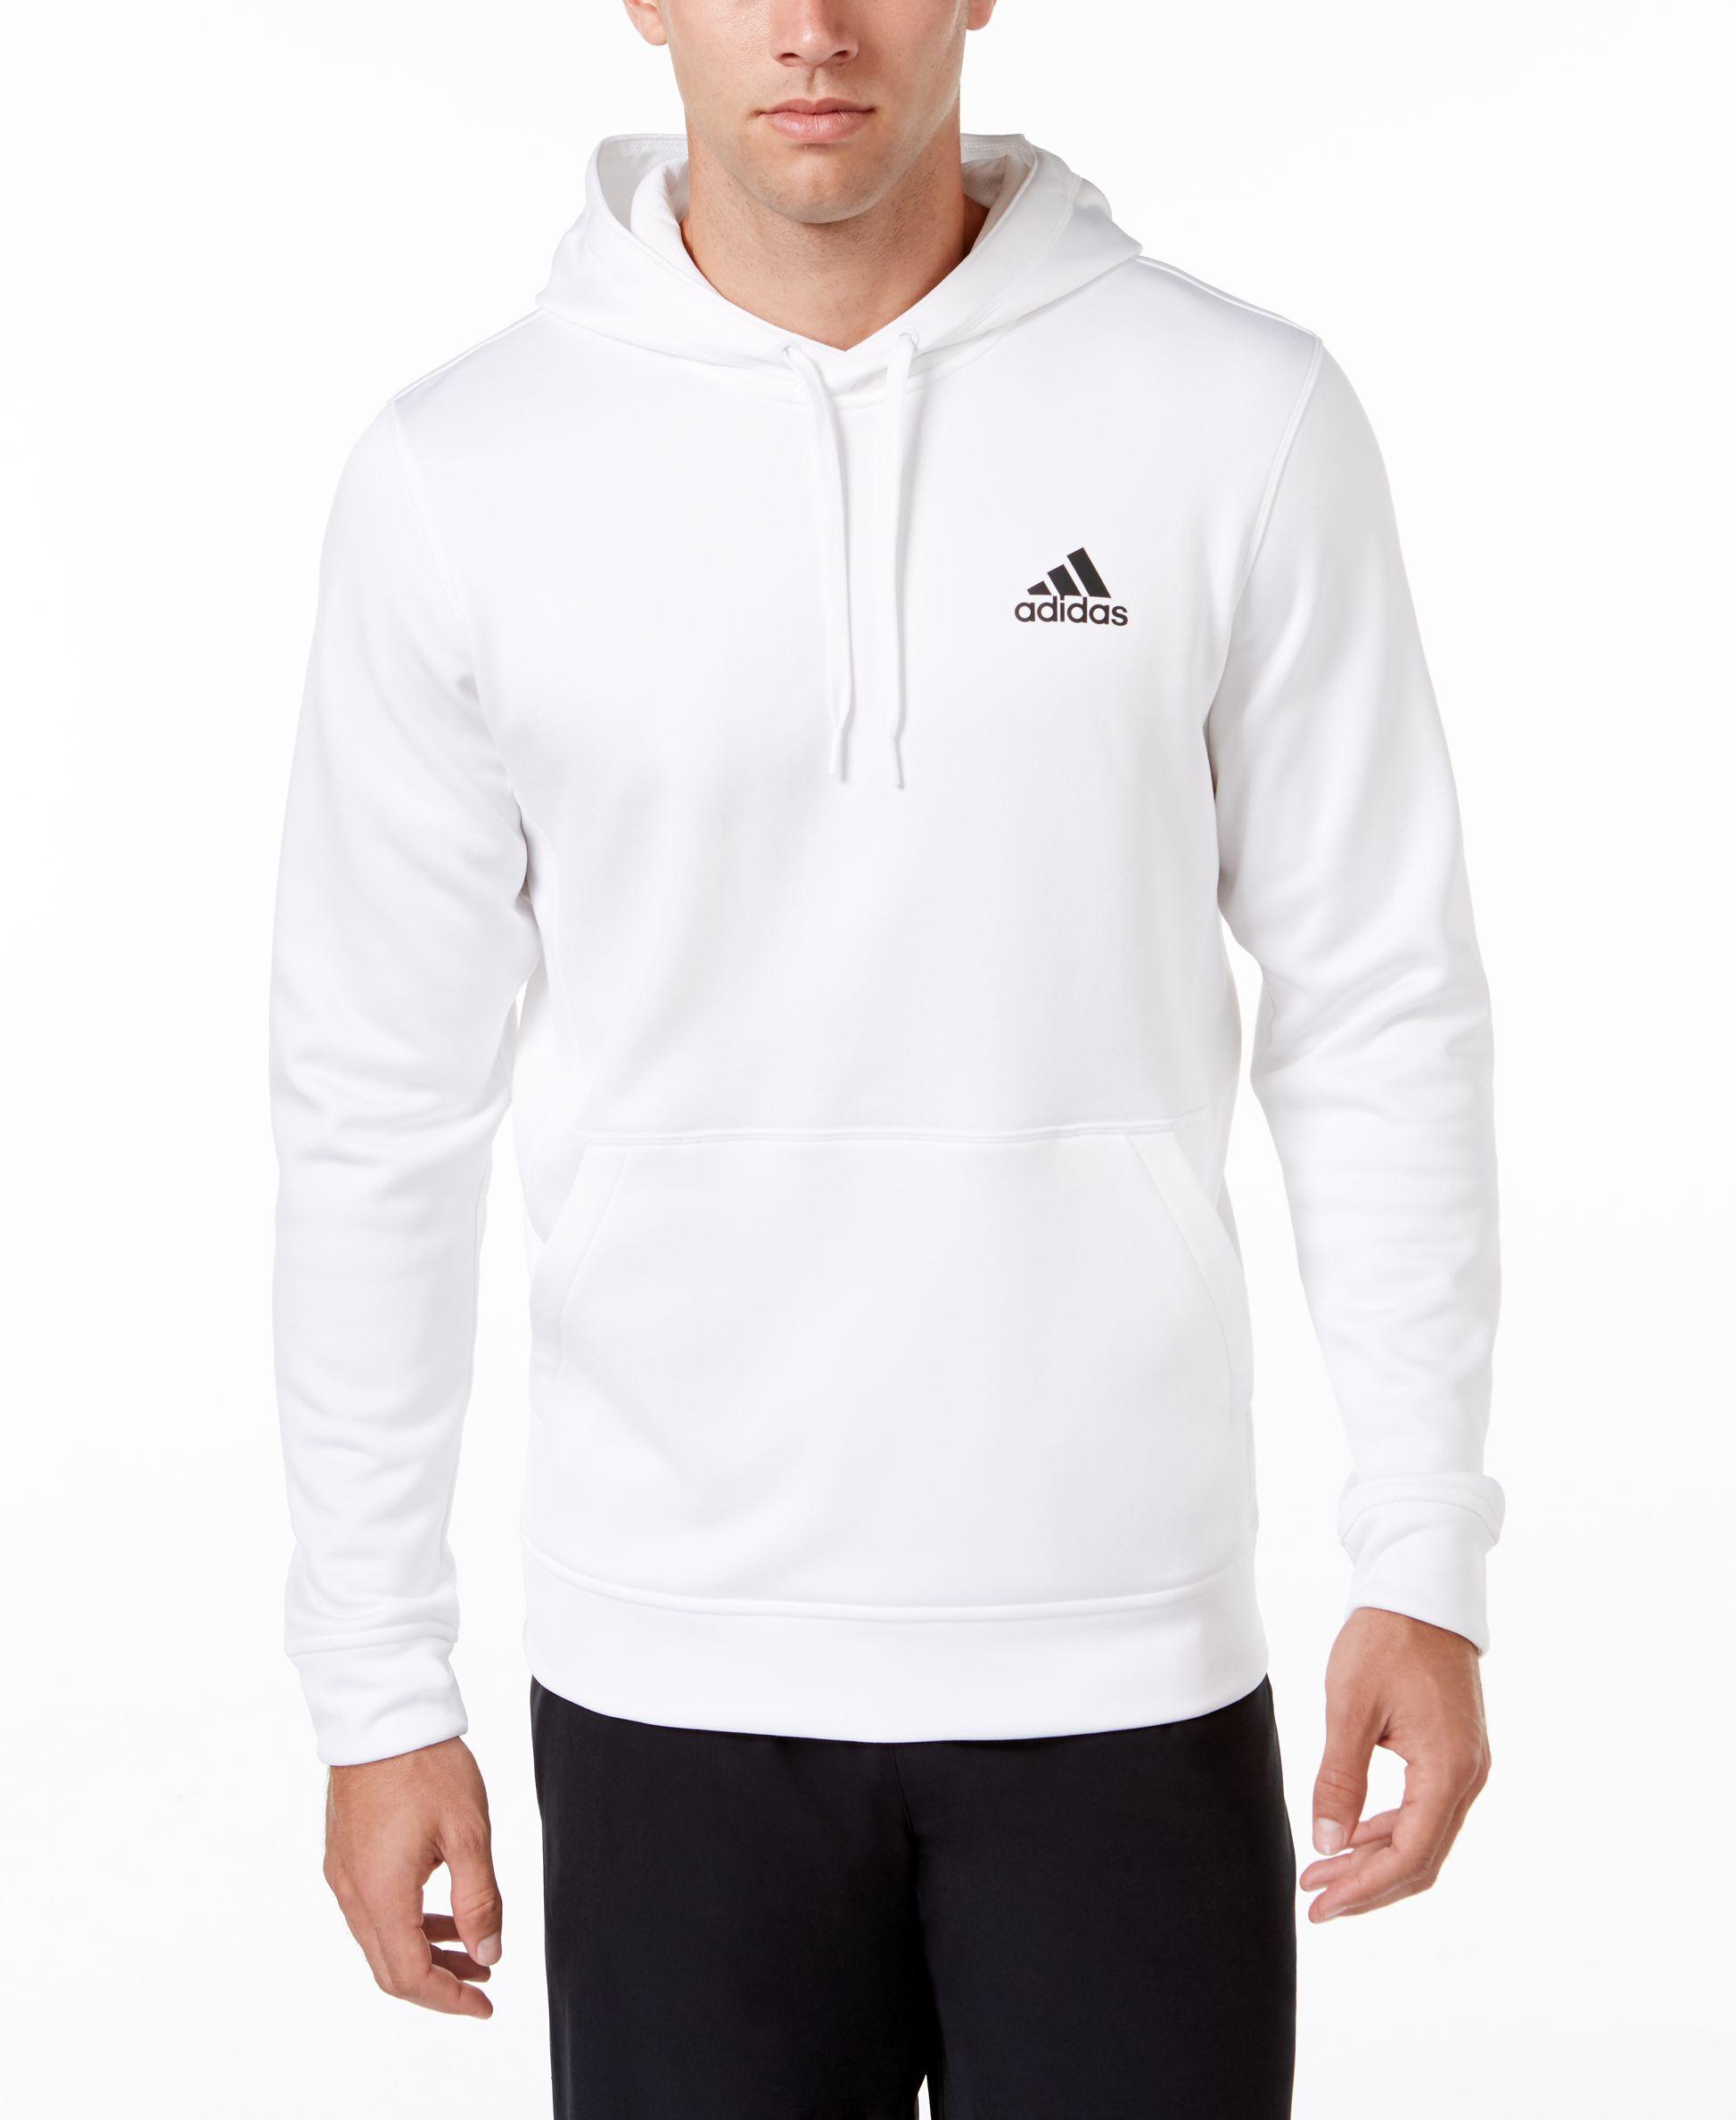 adidas Originals Synthetic Men's Team Issue Pullover Hoodie in White